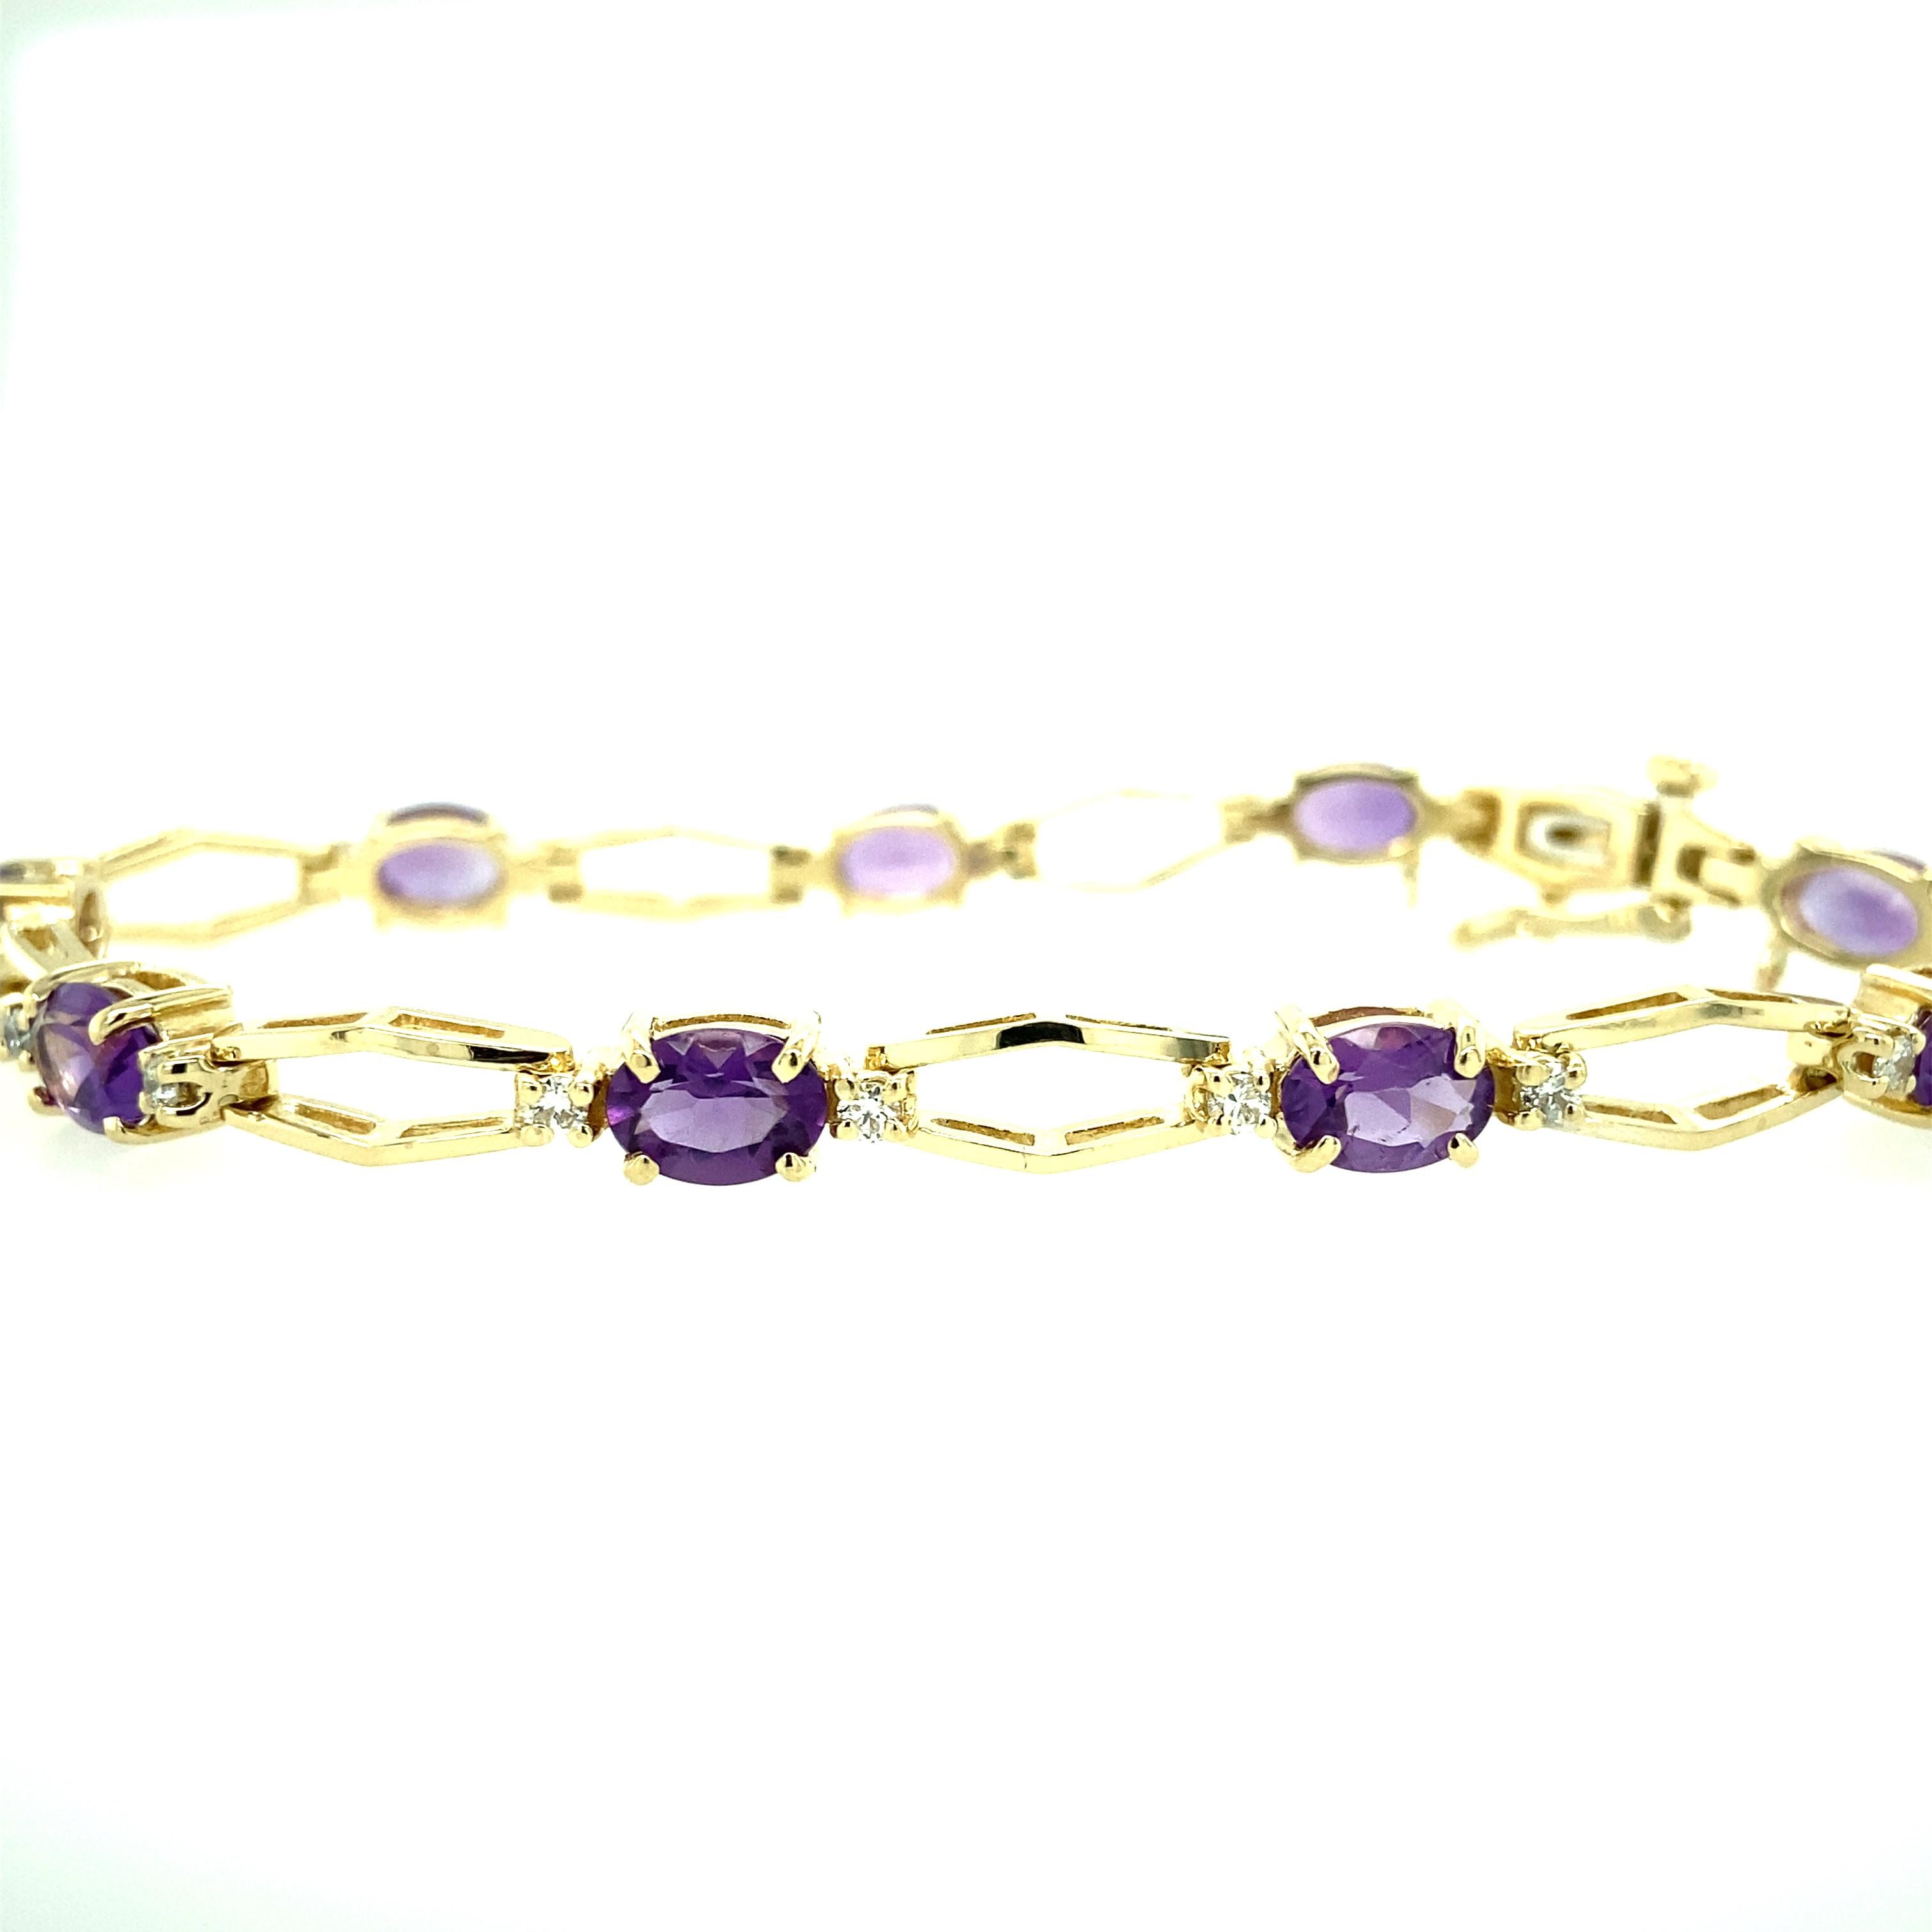 One 14 karat yellow gold (stamped 14K) estate bracelet set with nine 7x5mm oval amethysts and eighteen round brilliant diamonds, 0.50 carat total weight with matching I/J color and SI clarity.  The bracelet measures 8 inches long and is complete